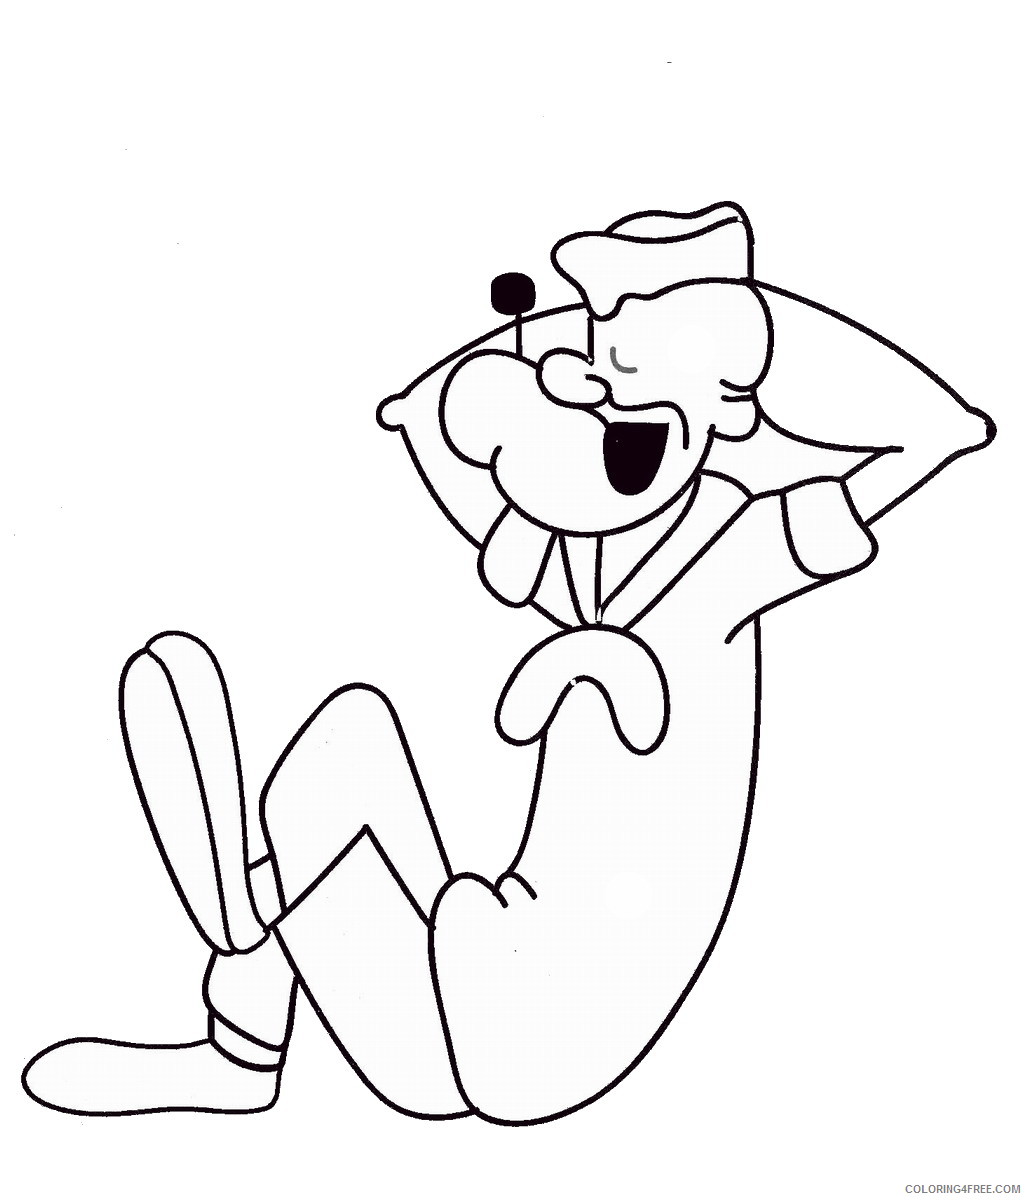 Popeye Coloring Pages Cartoons popeye_cl_34 Printable 2020 5039 Coloring4free